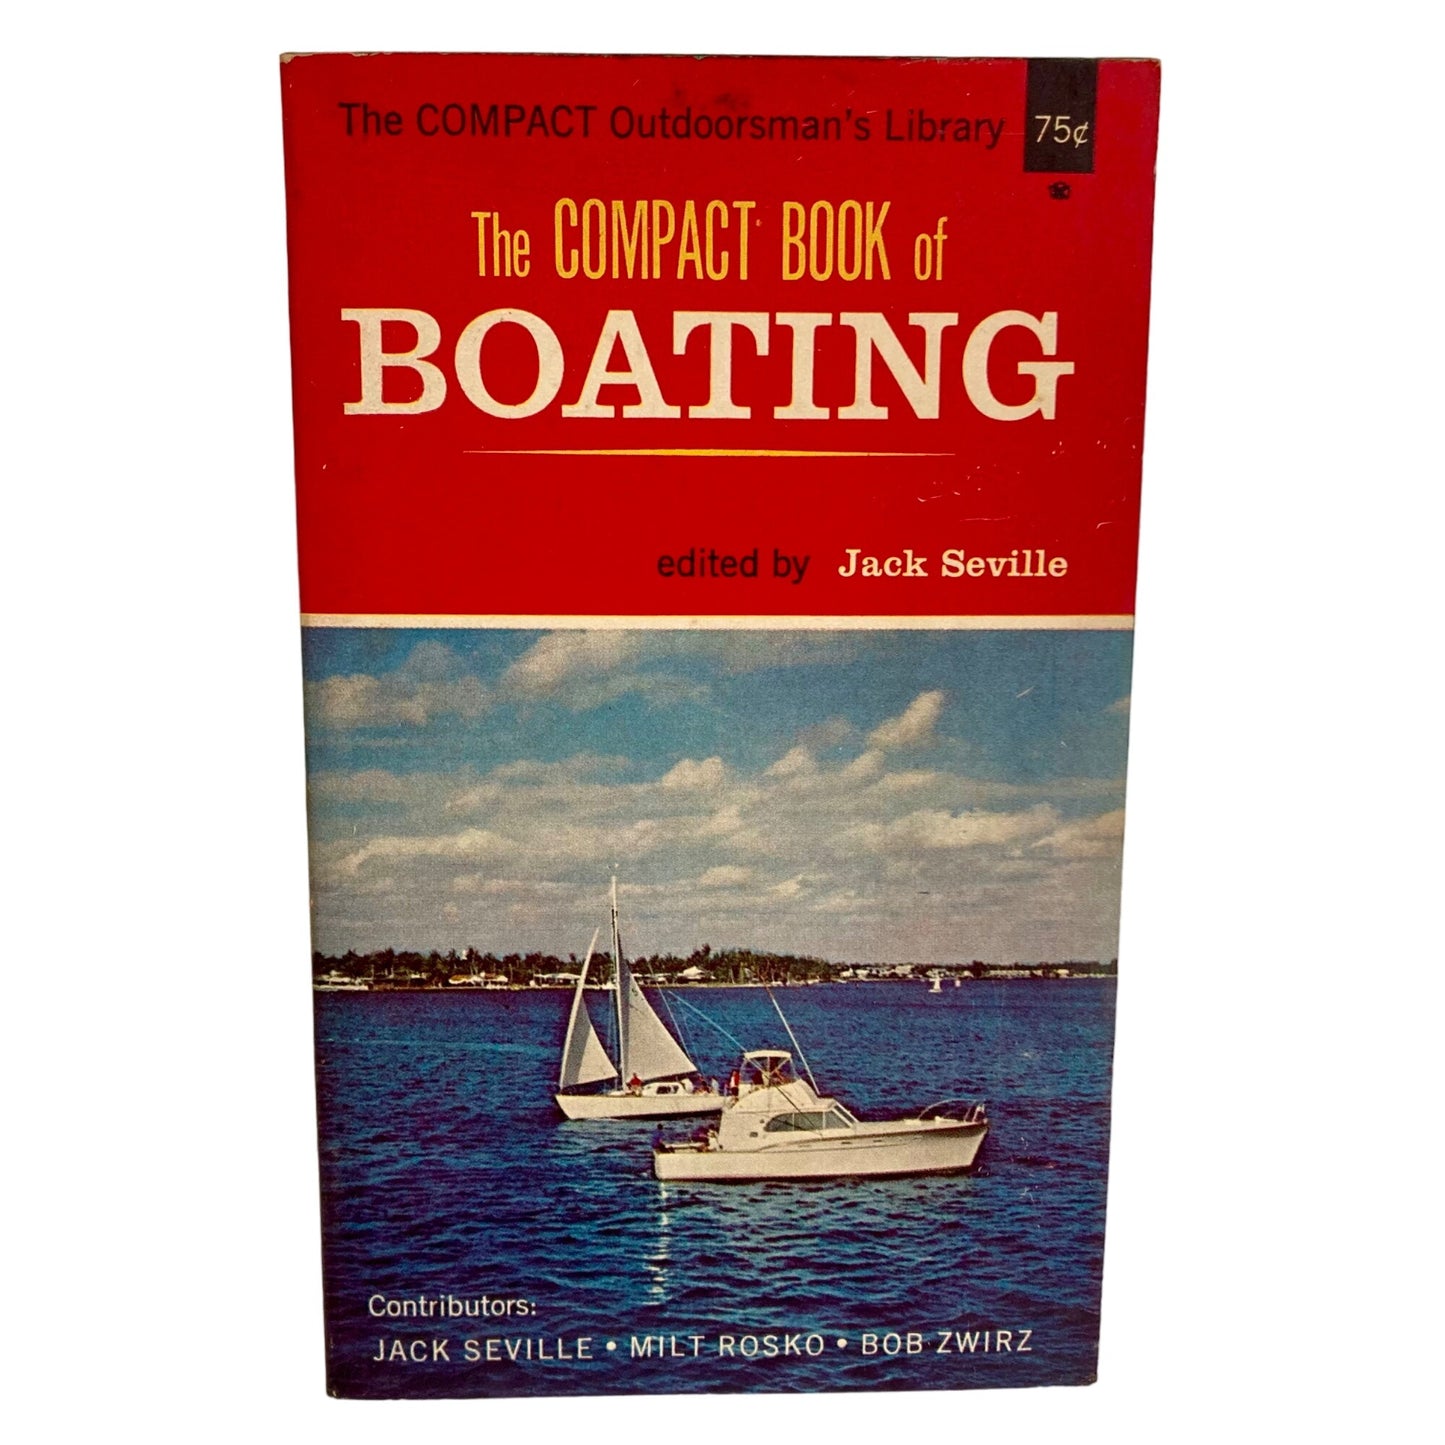 Vintage The Compact Book of Boating by Jack Seville American Sports Library